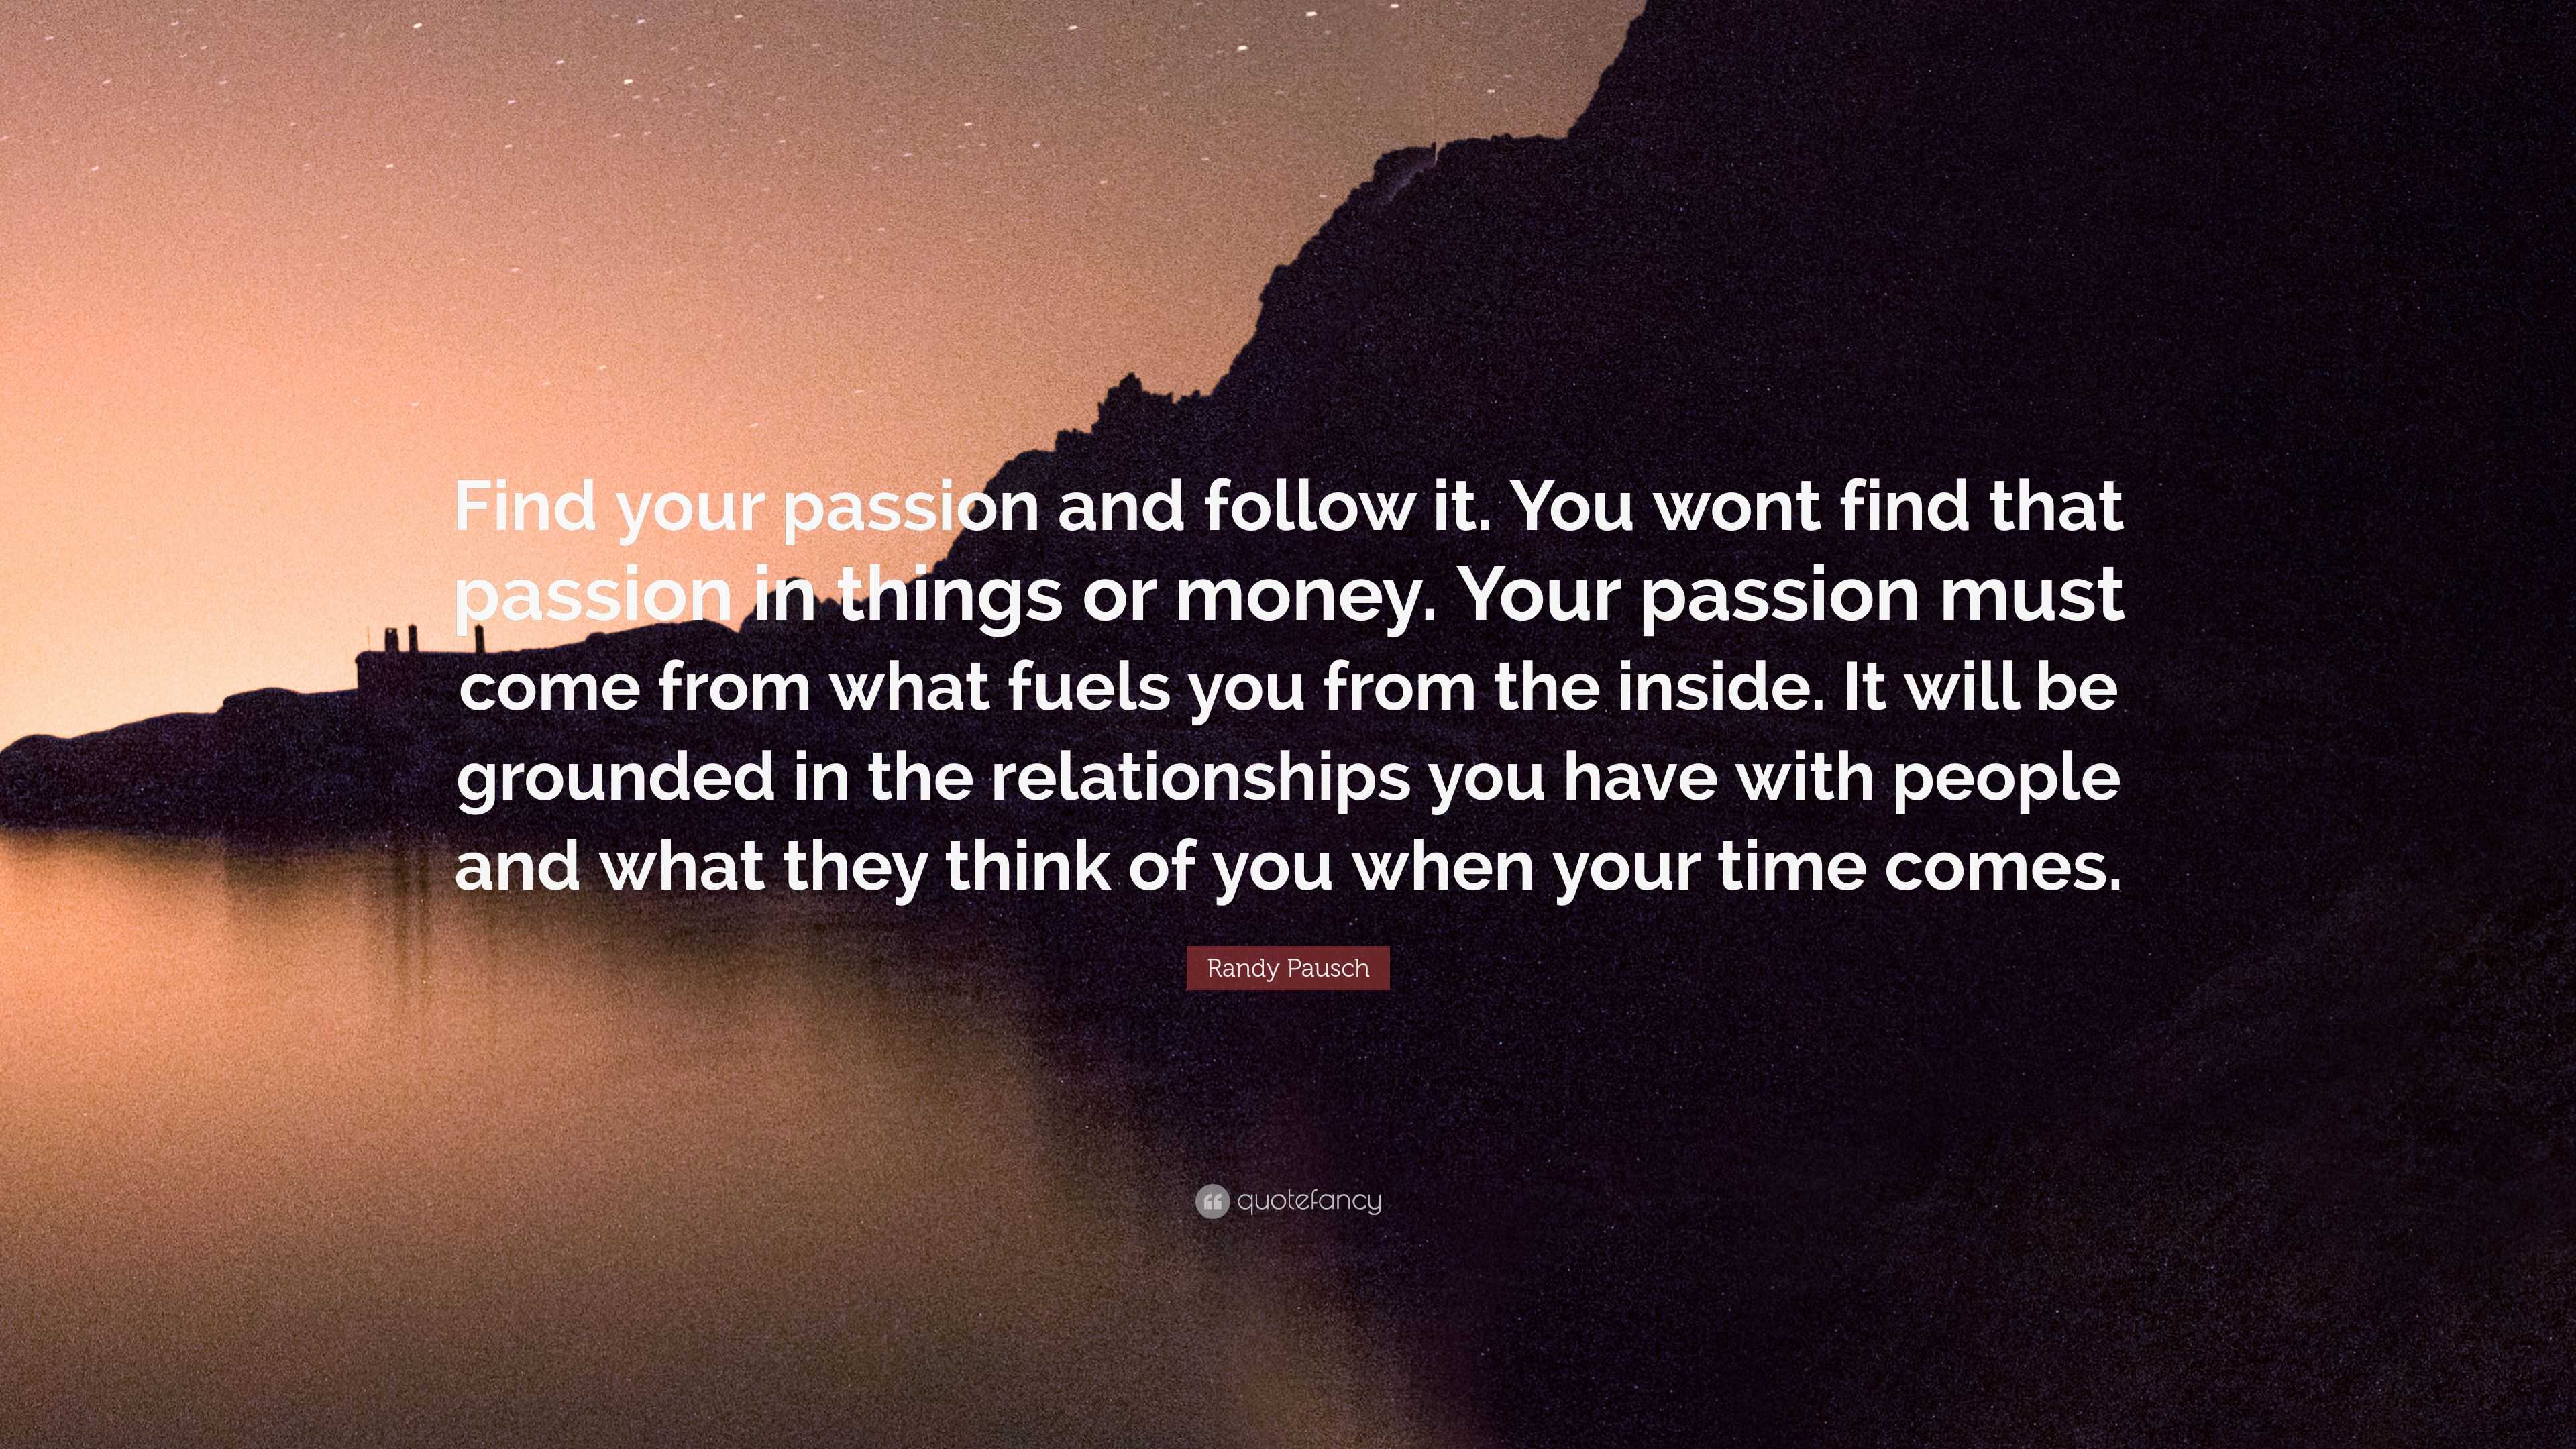 Randy Pausch Quote “find Your Passion And Follow It You Wont Find That Passion In Things Or 